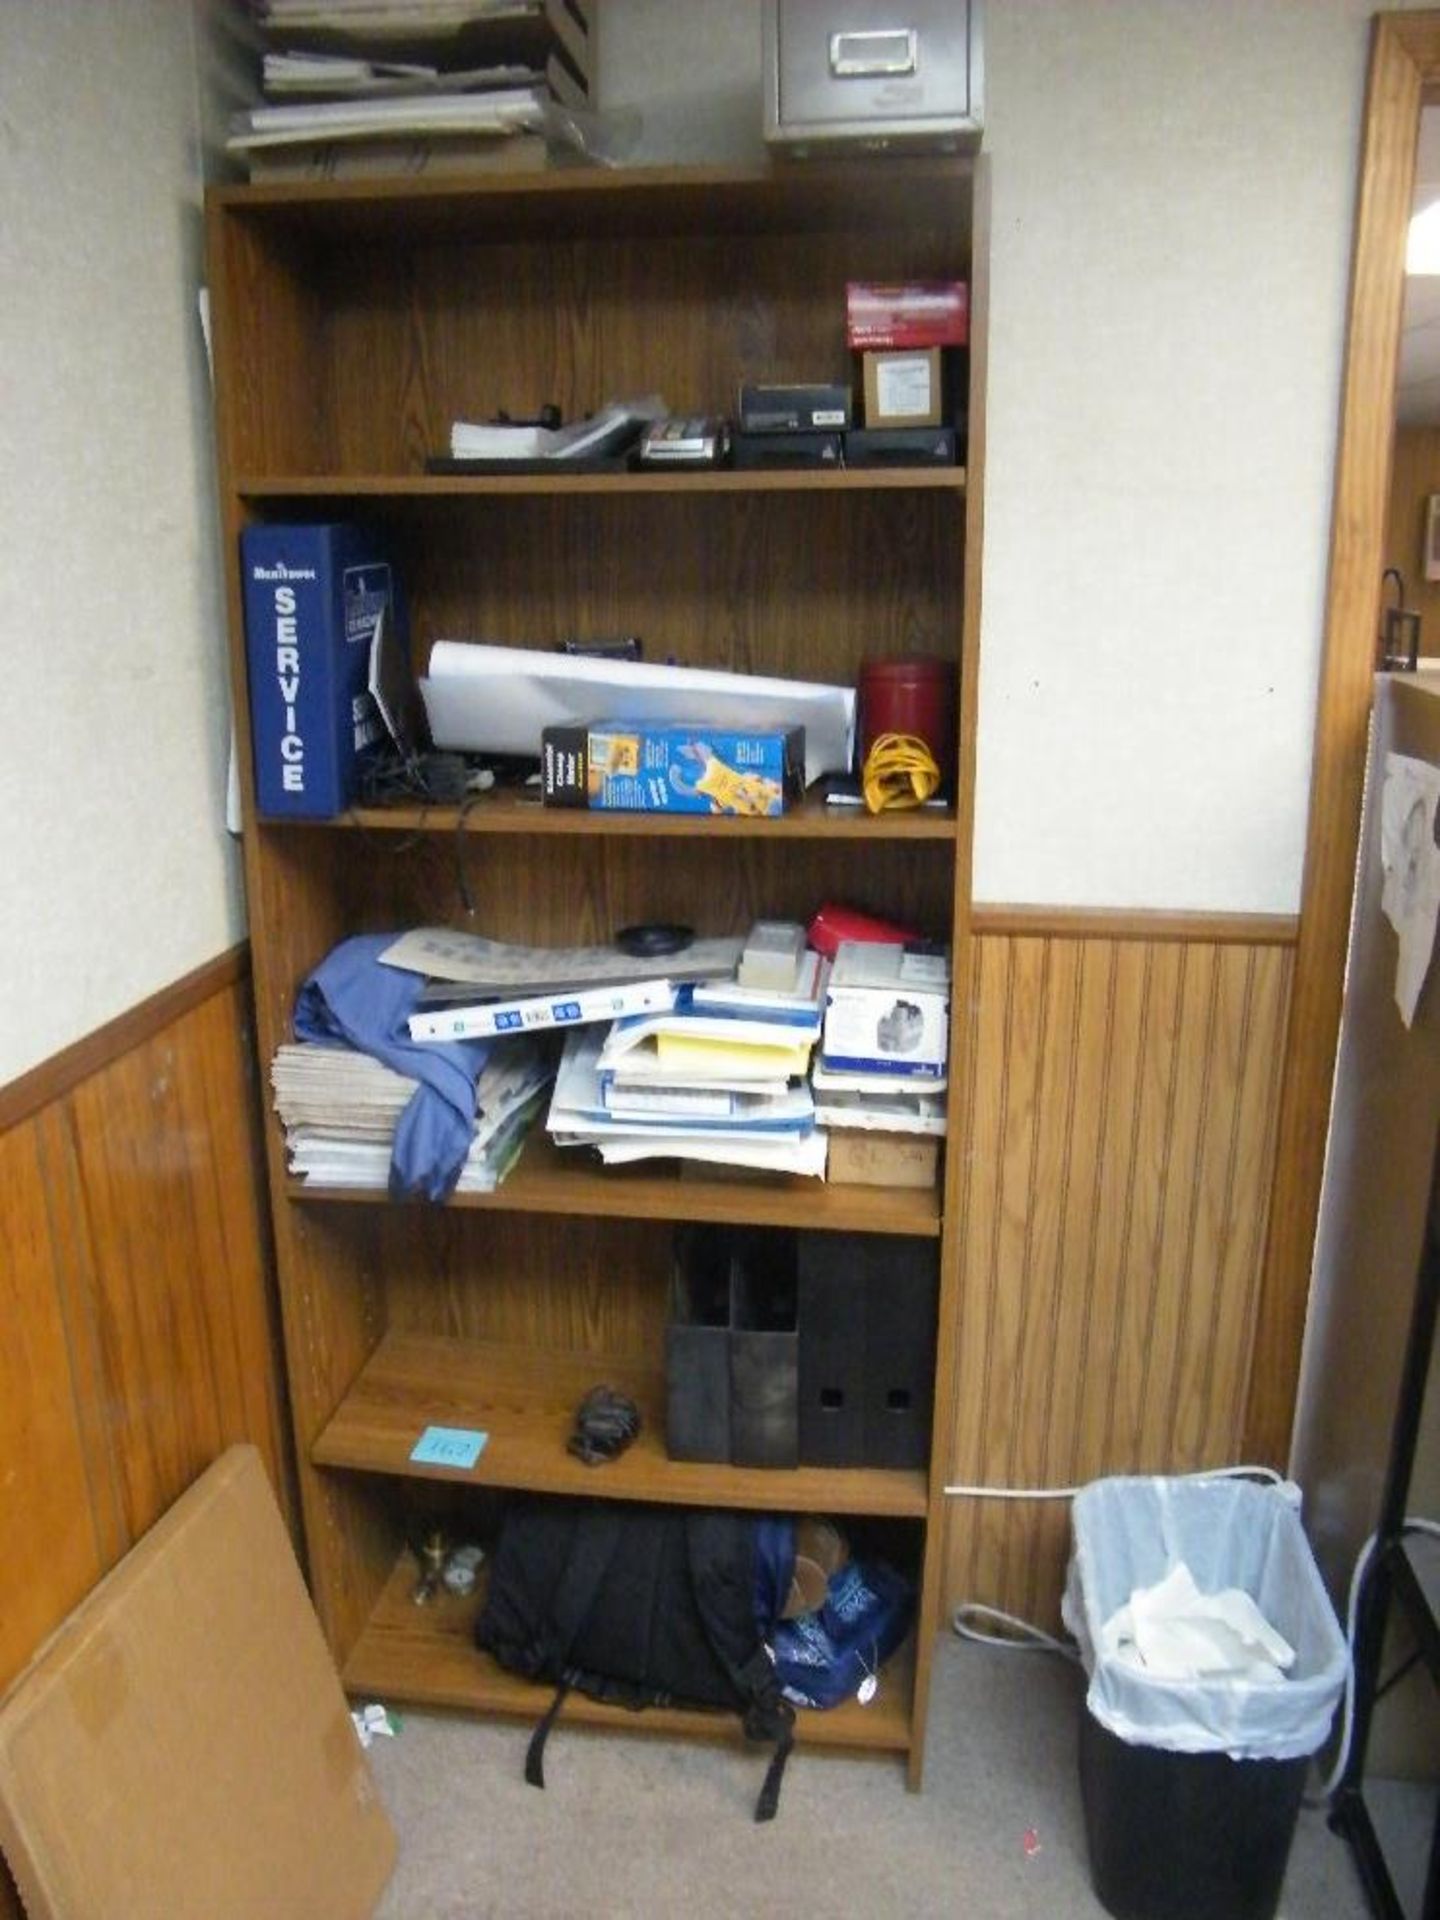 Contents of Office, EXCLUDING COMPUTER EQUIPMENT, (4 Desks, 3 desk chairs, computer desk, bookcases, - Image 4 of 9